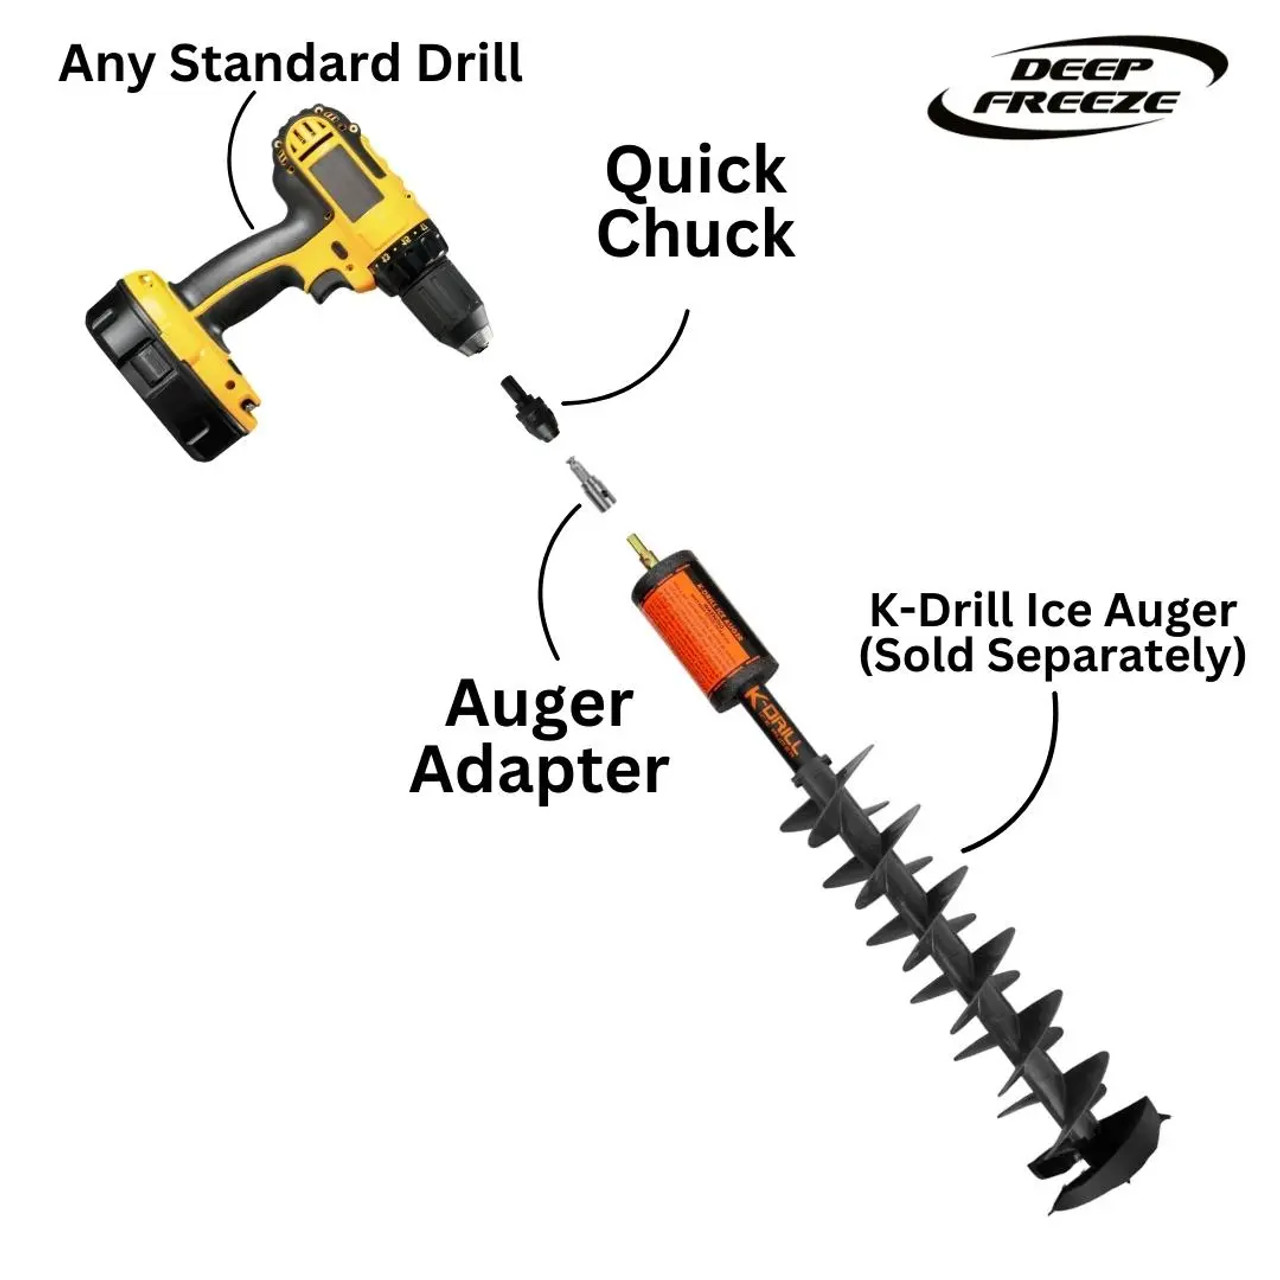 EZ Auger Power Drill Connection System